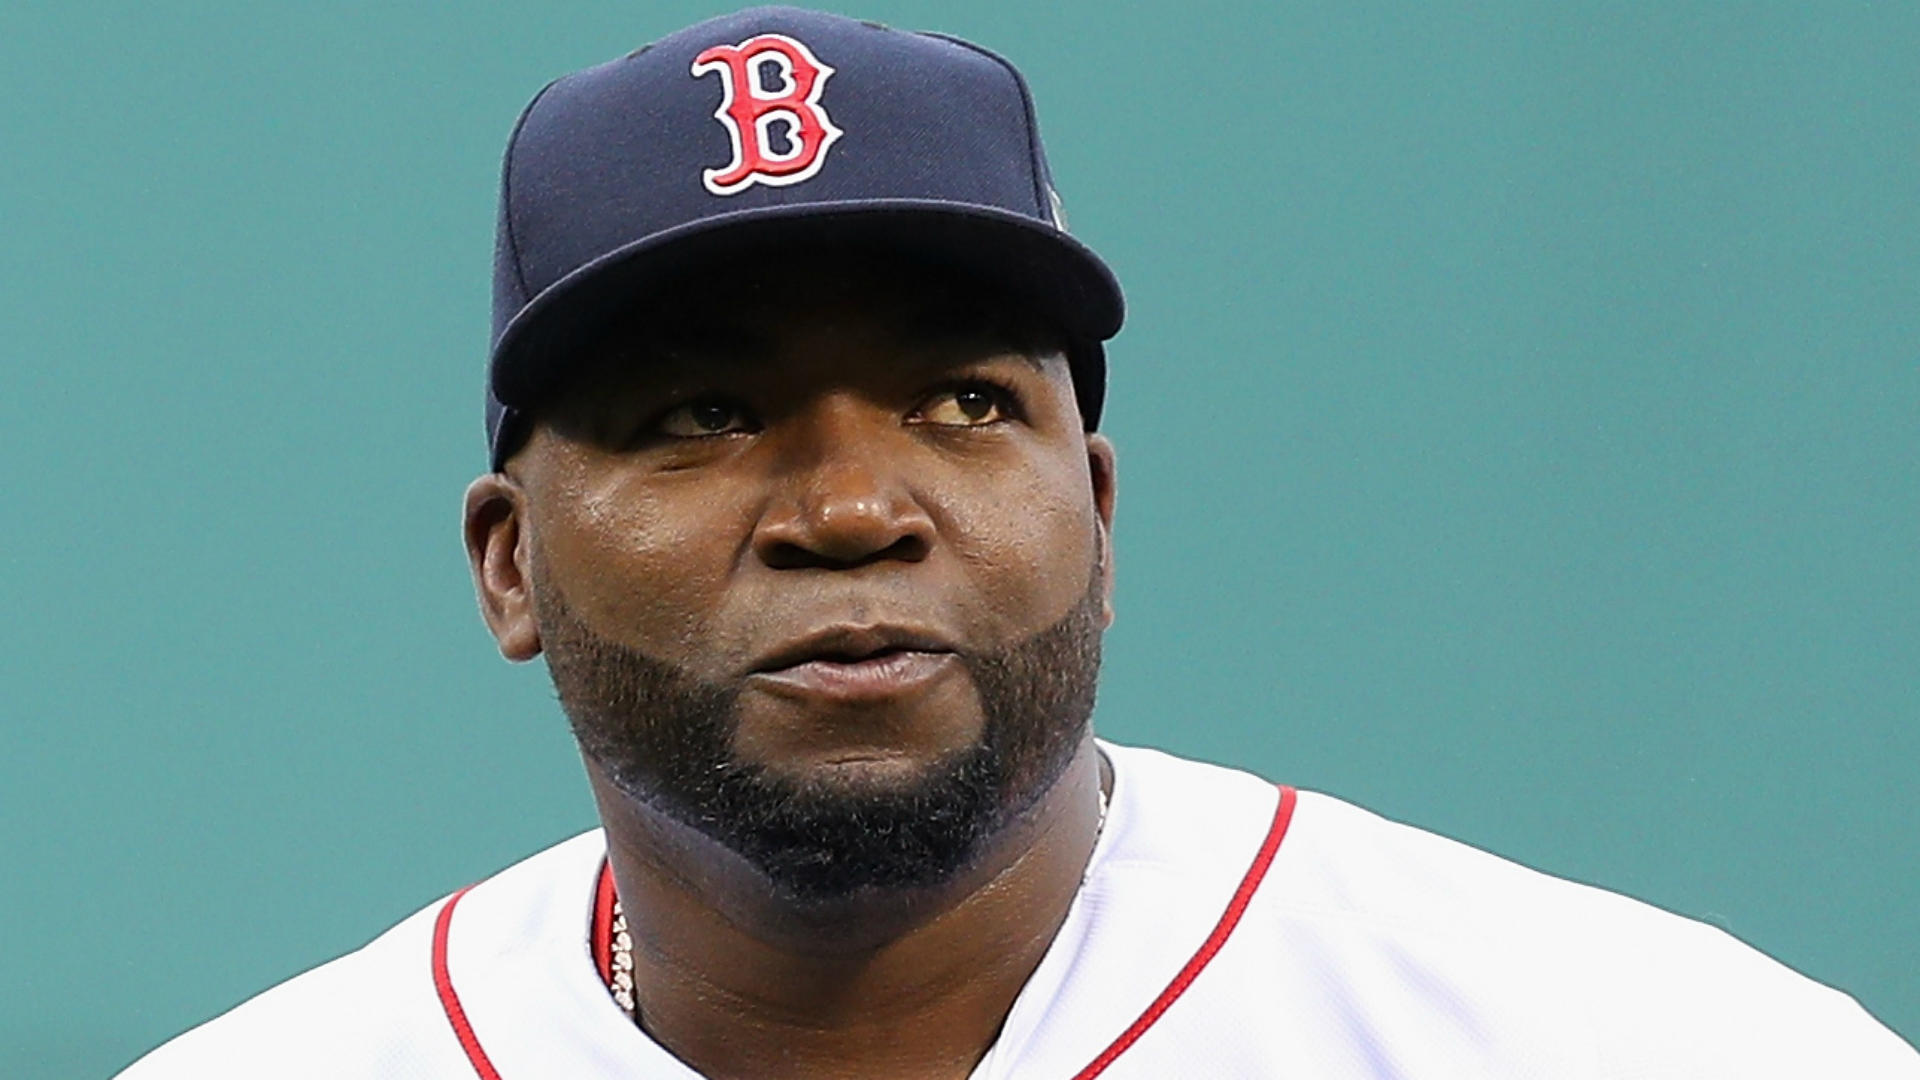 Police said the suspects in the shooting had been hired as hit men to kill Ortiz.